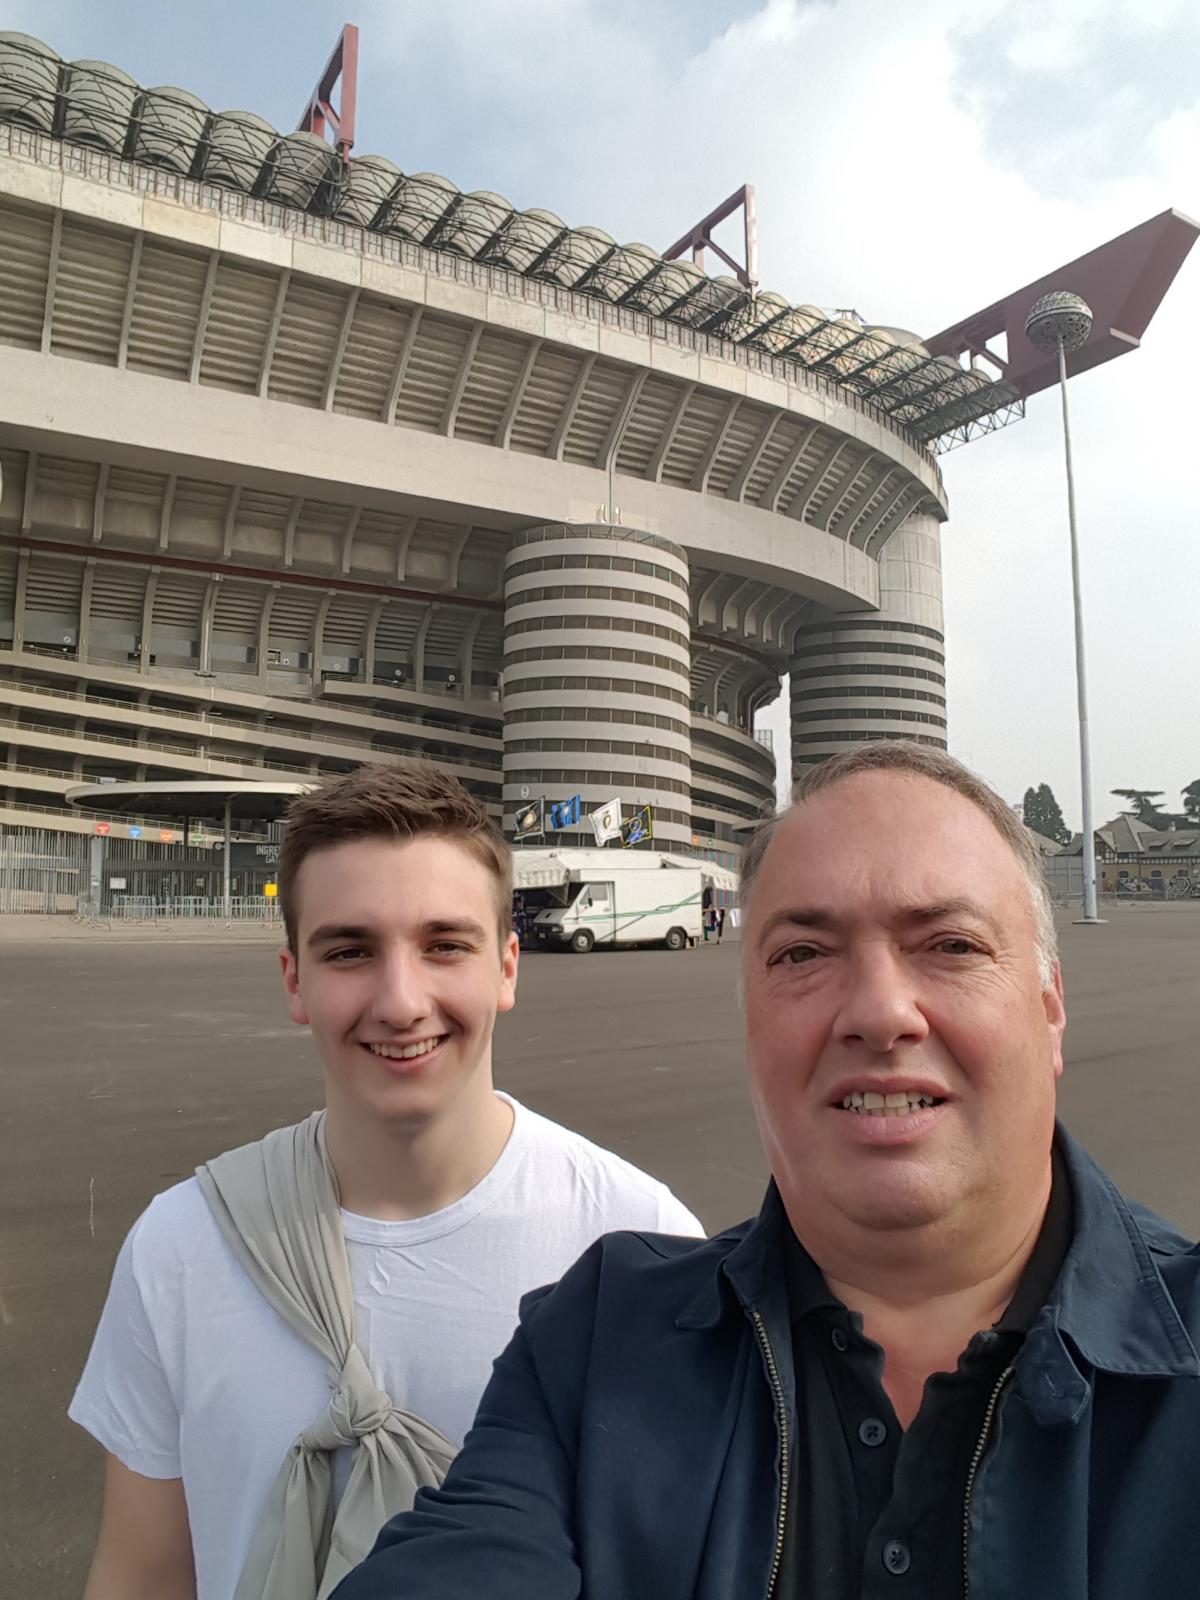 Saints fans Roger and Will at the San Siro.